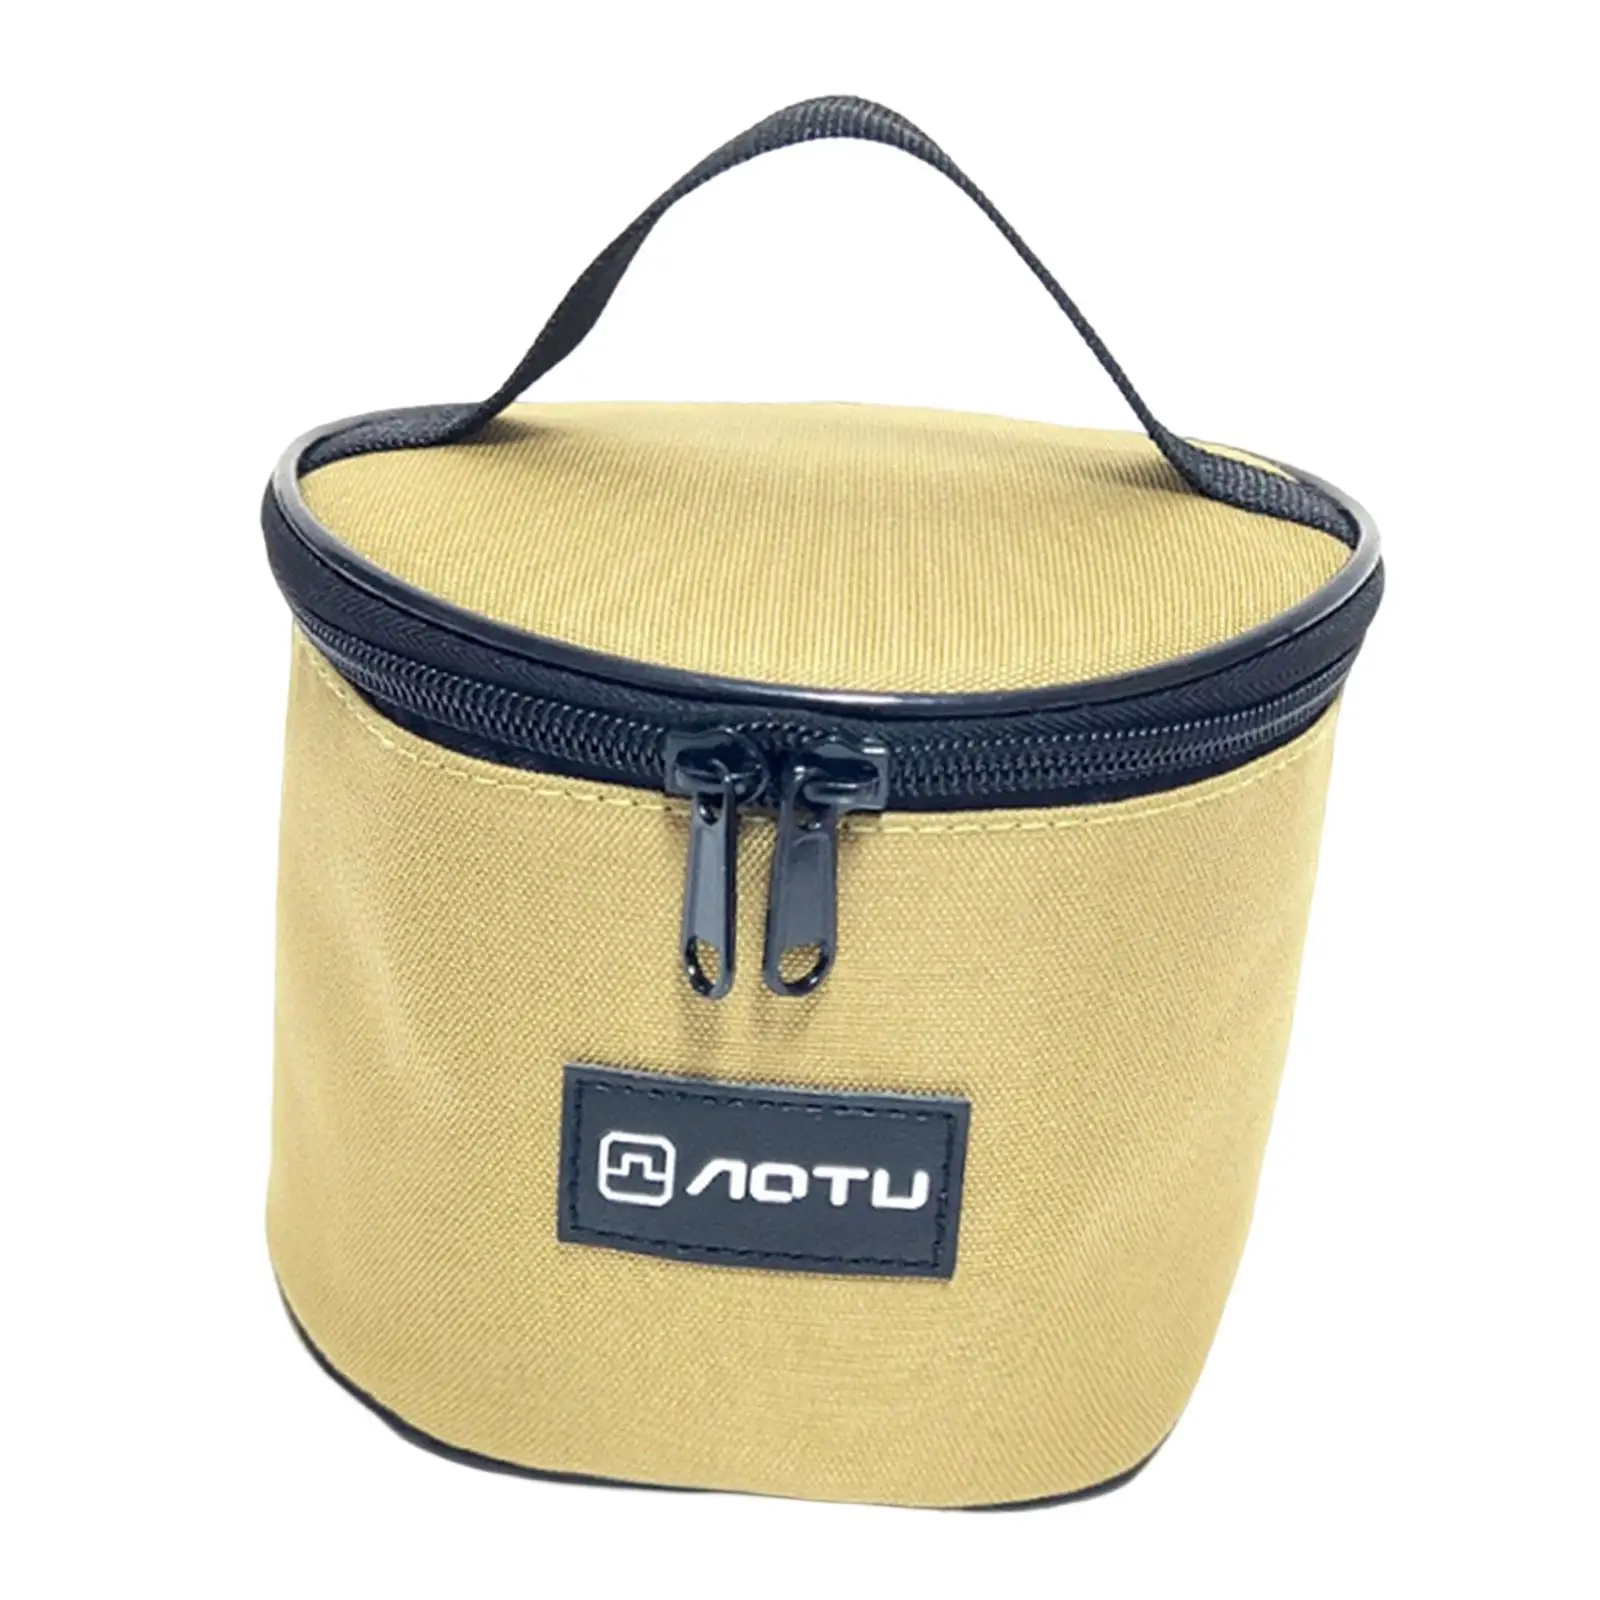 Portable Bowl Storage Bag Travel Tableware Hiking Activities Oxford Pouch